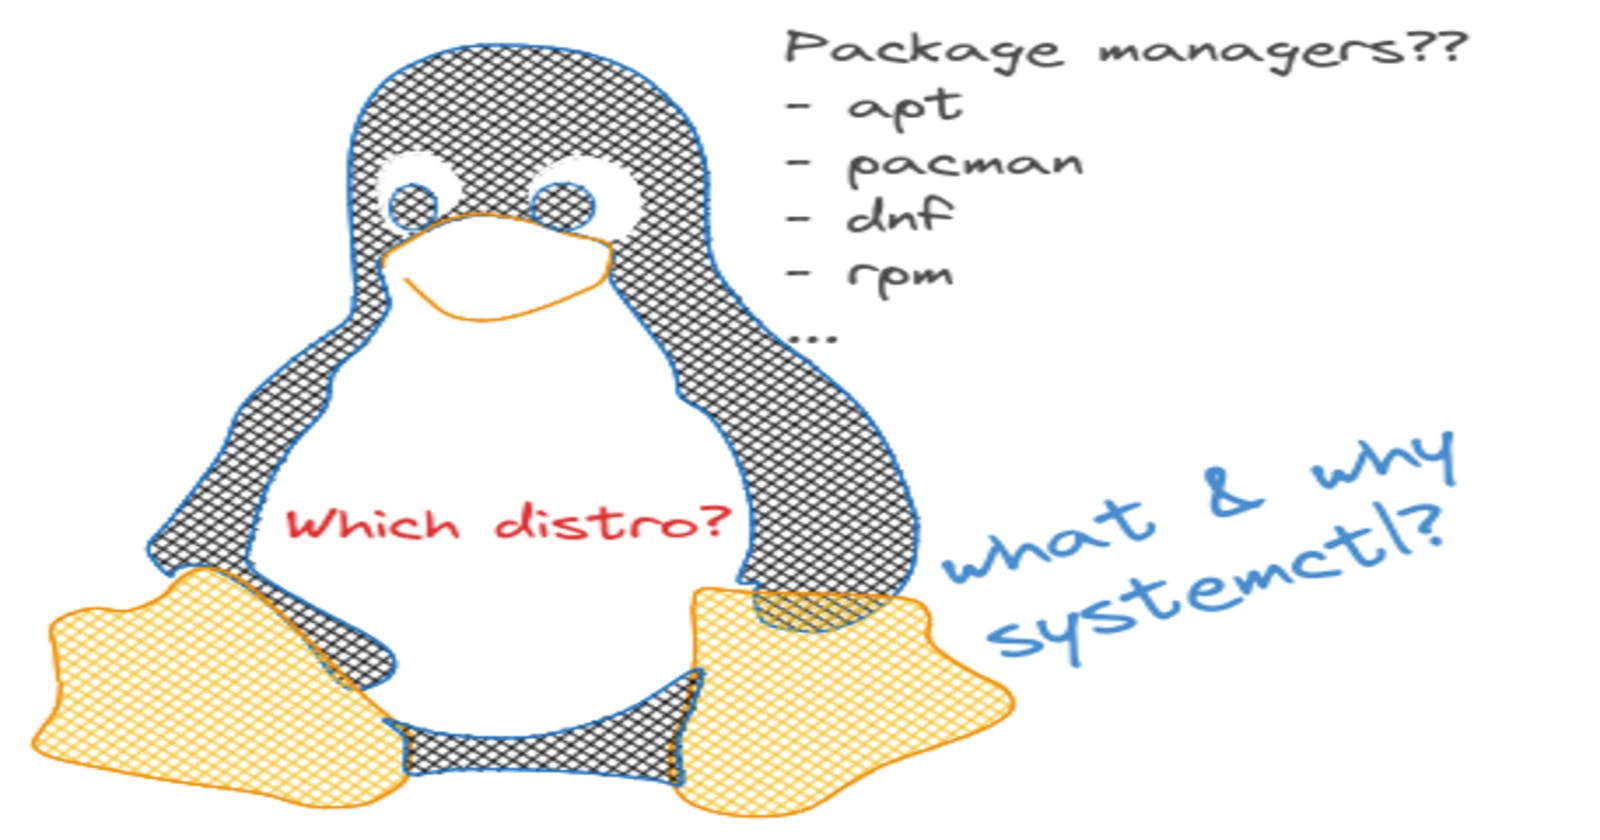 Day 7 - Understanding package manager and systemctl